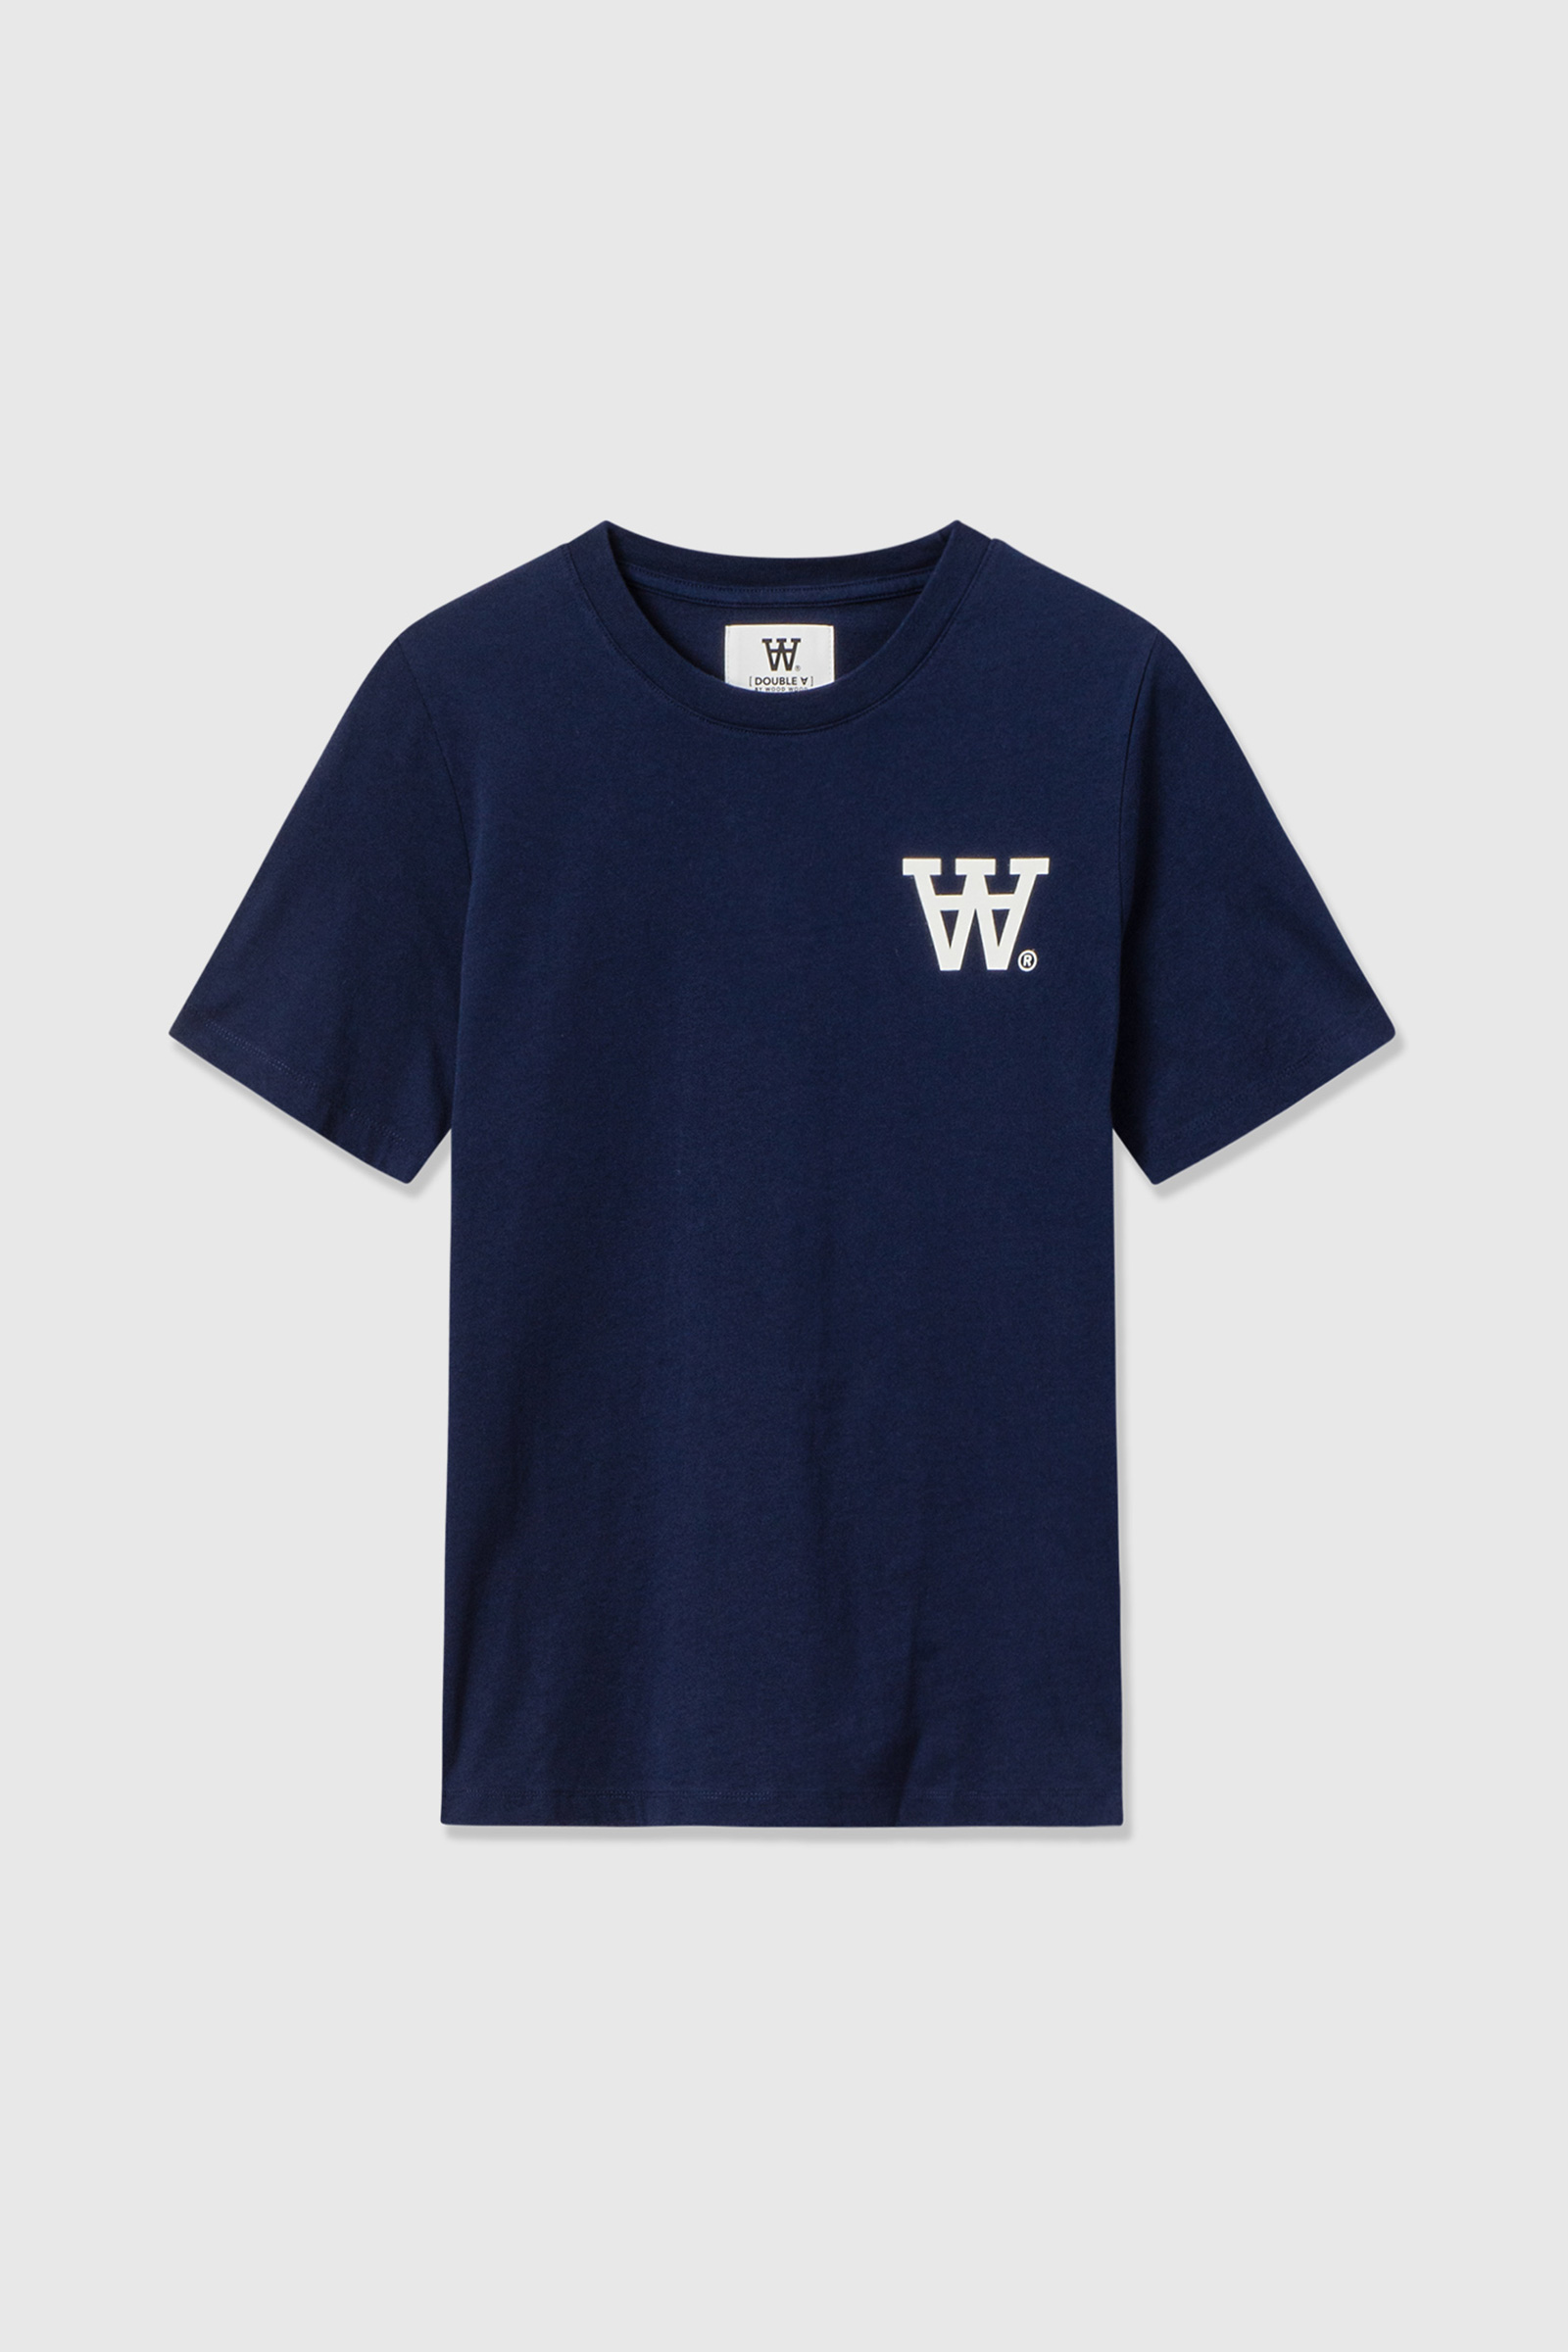 afgår sammensatte angreb Double A by Wood Wood Mia T-shirt Navy | WoodWood.com